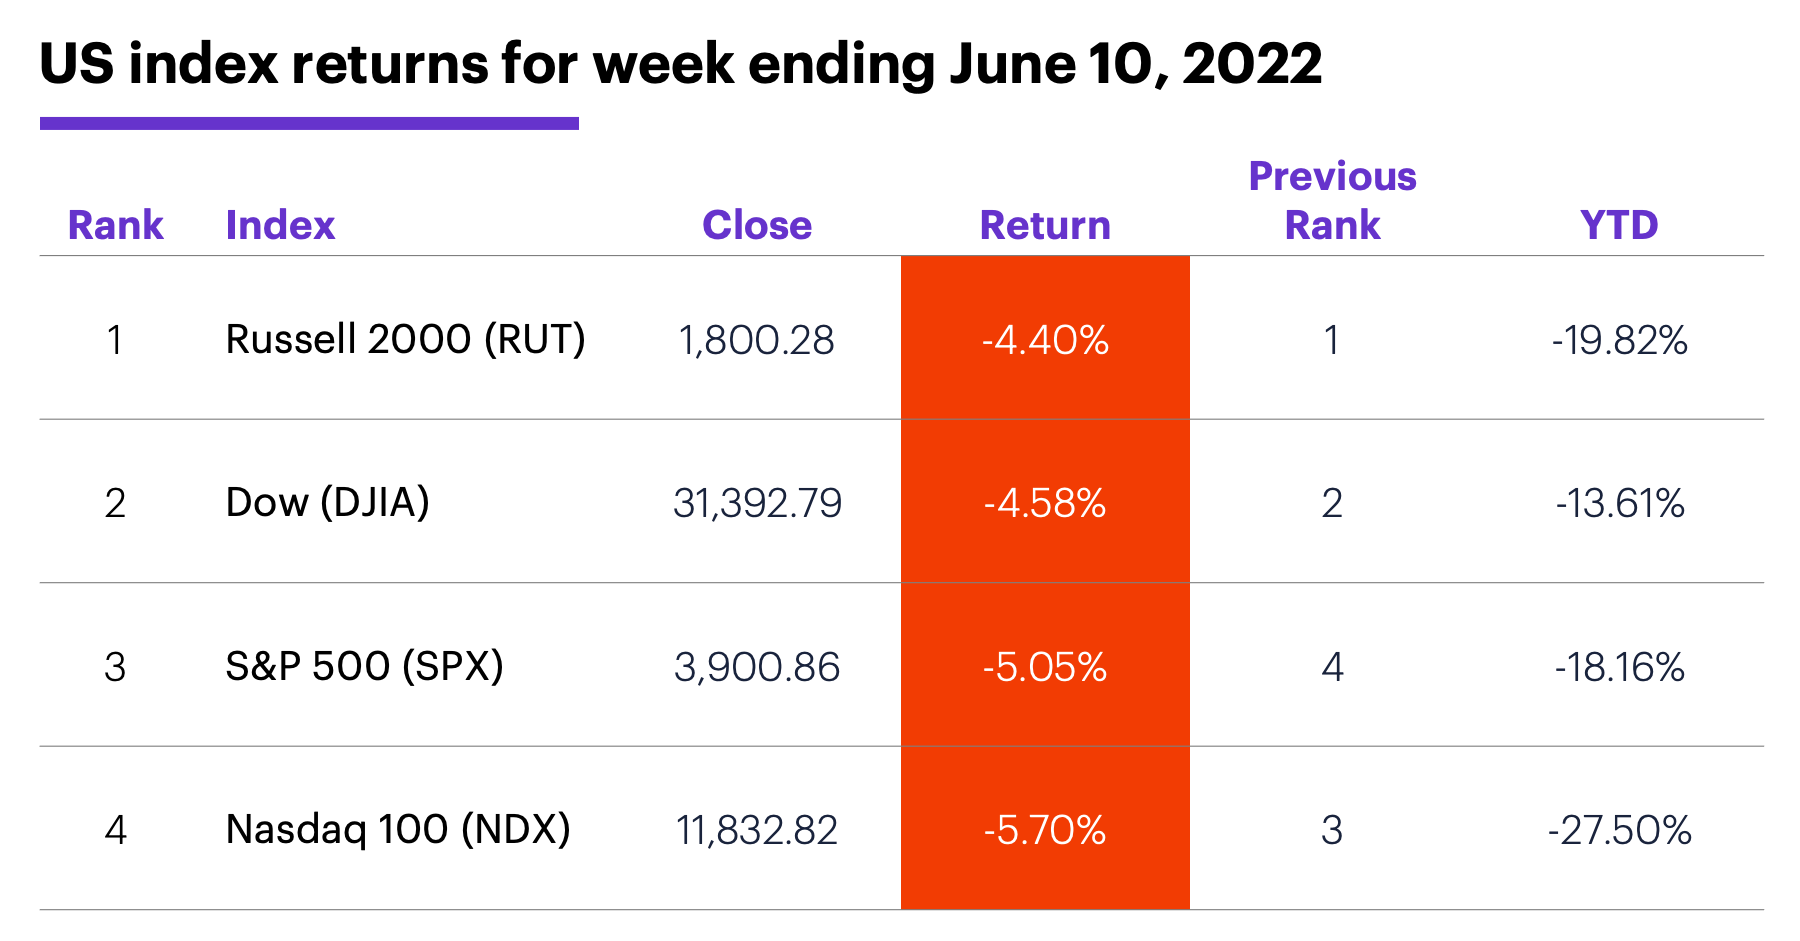 US stock index performance table for week ending 6/10/22. S&P 500 (SPX), Nasdaq 100 (NDX), Russell 2000 (RUT), Dow Jones Industrial Average (DJIA).